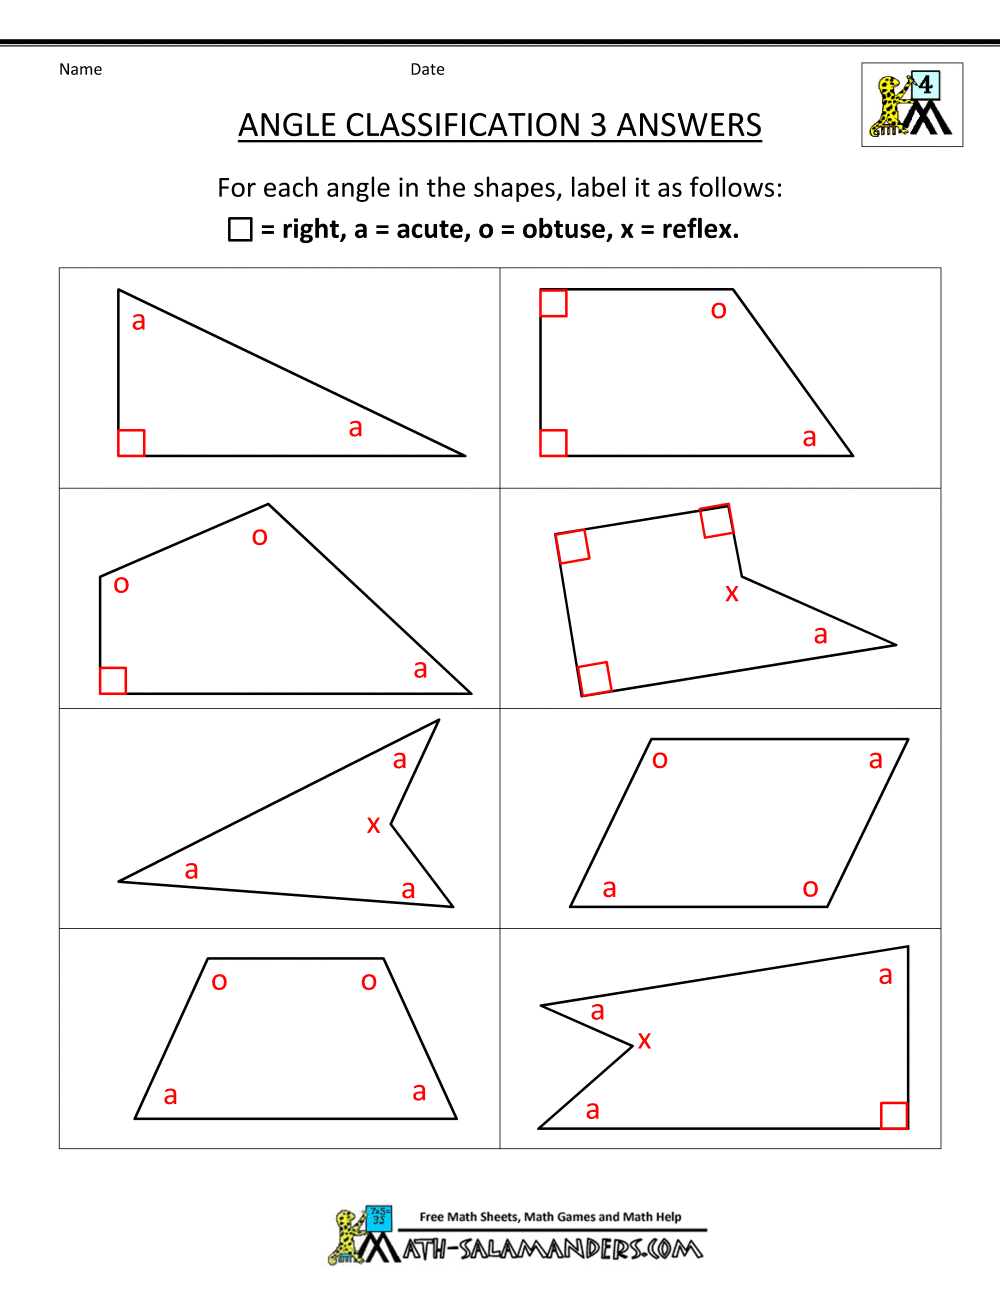 22th Grade Geometry Inside Polygon And Angles Worksheet